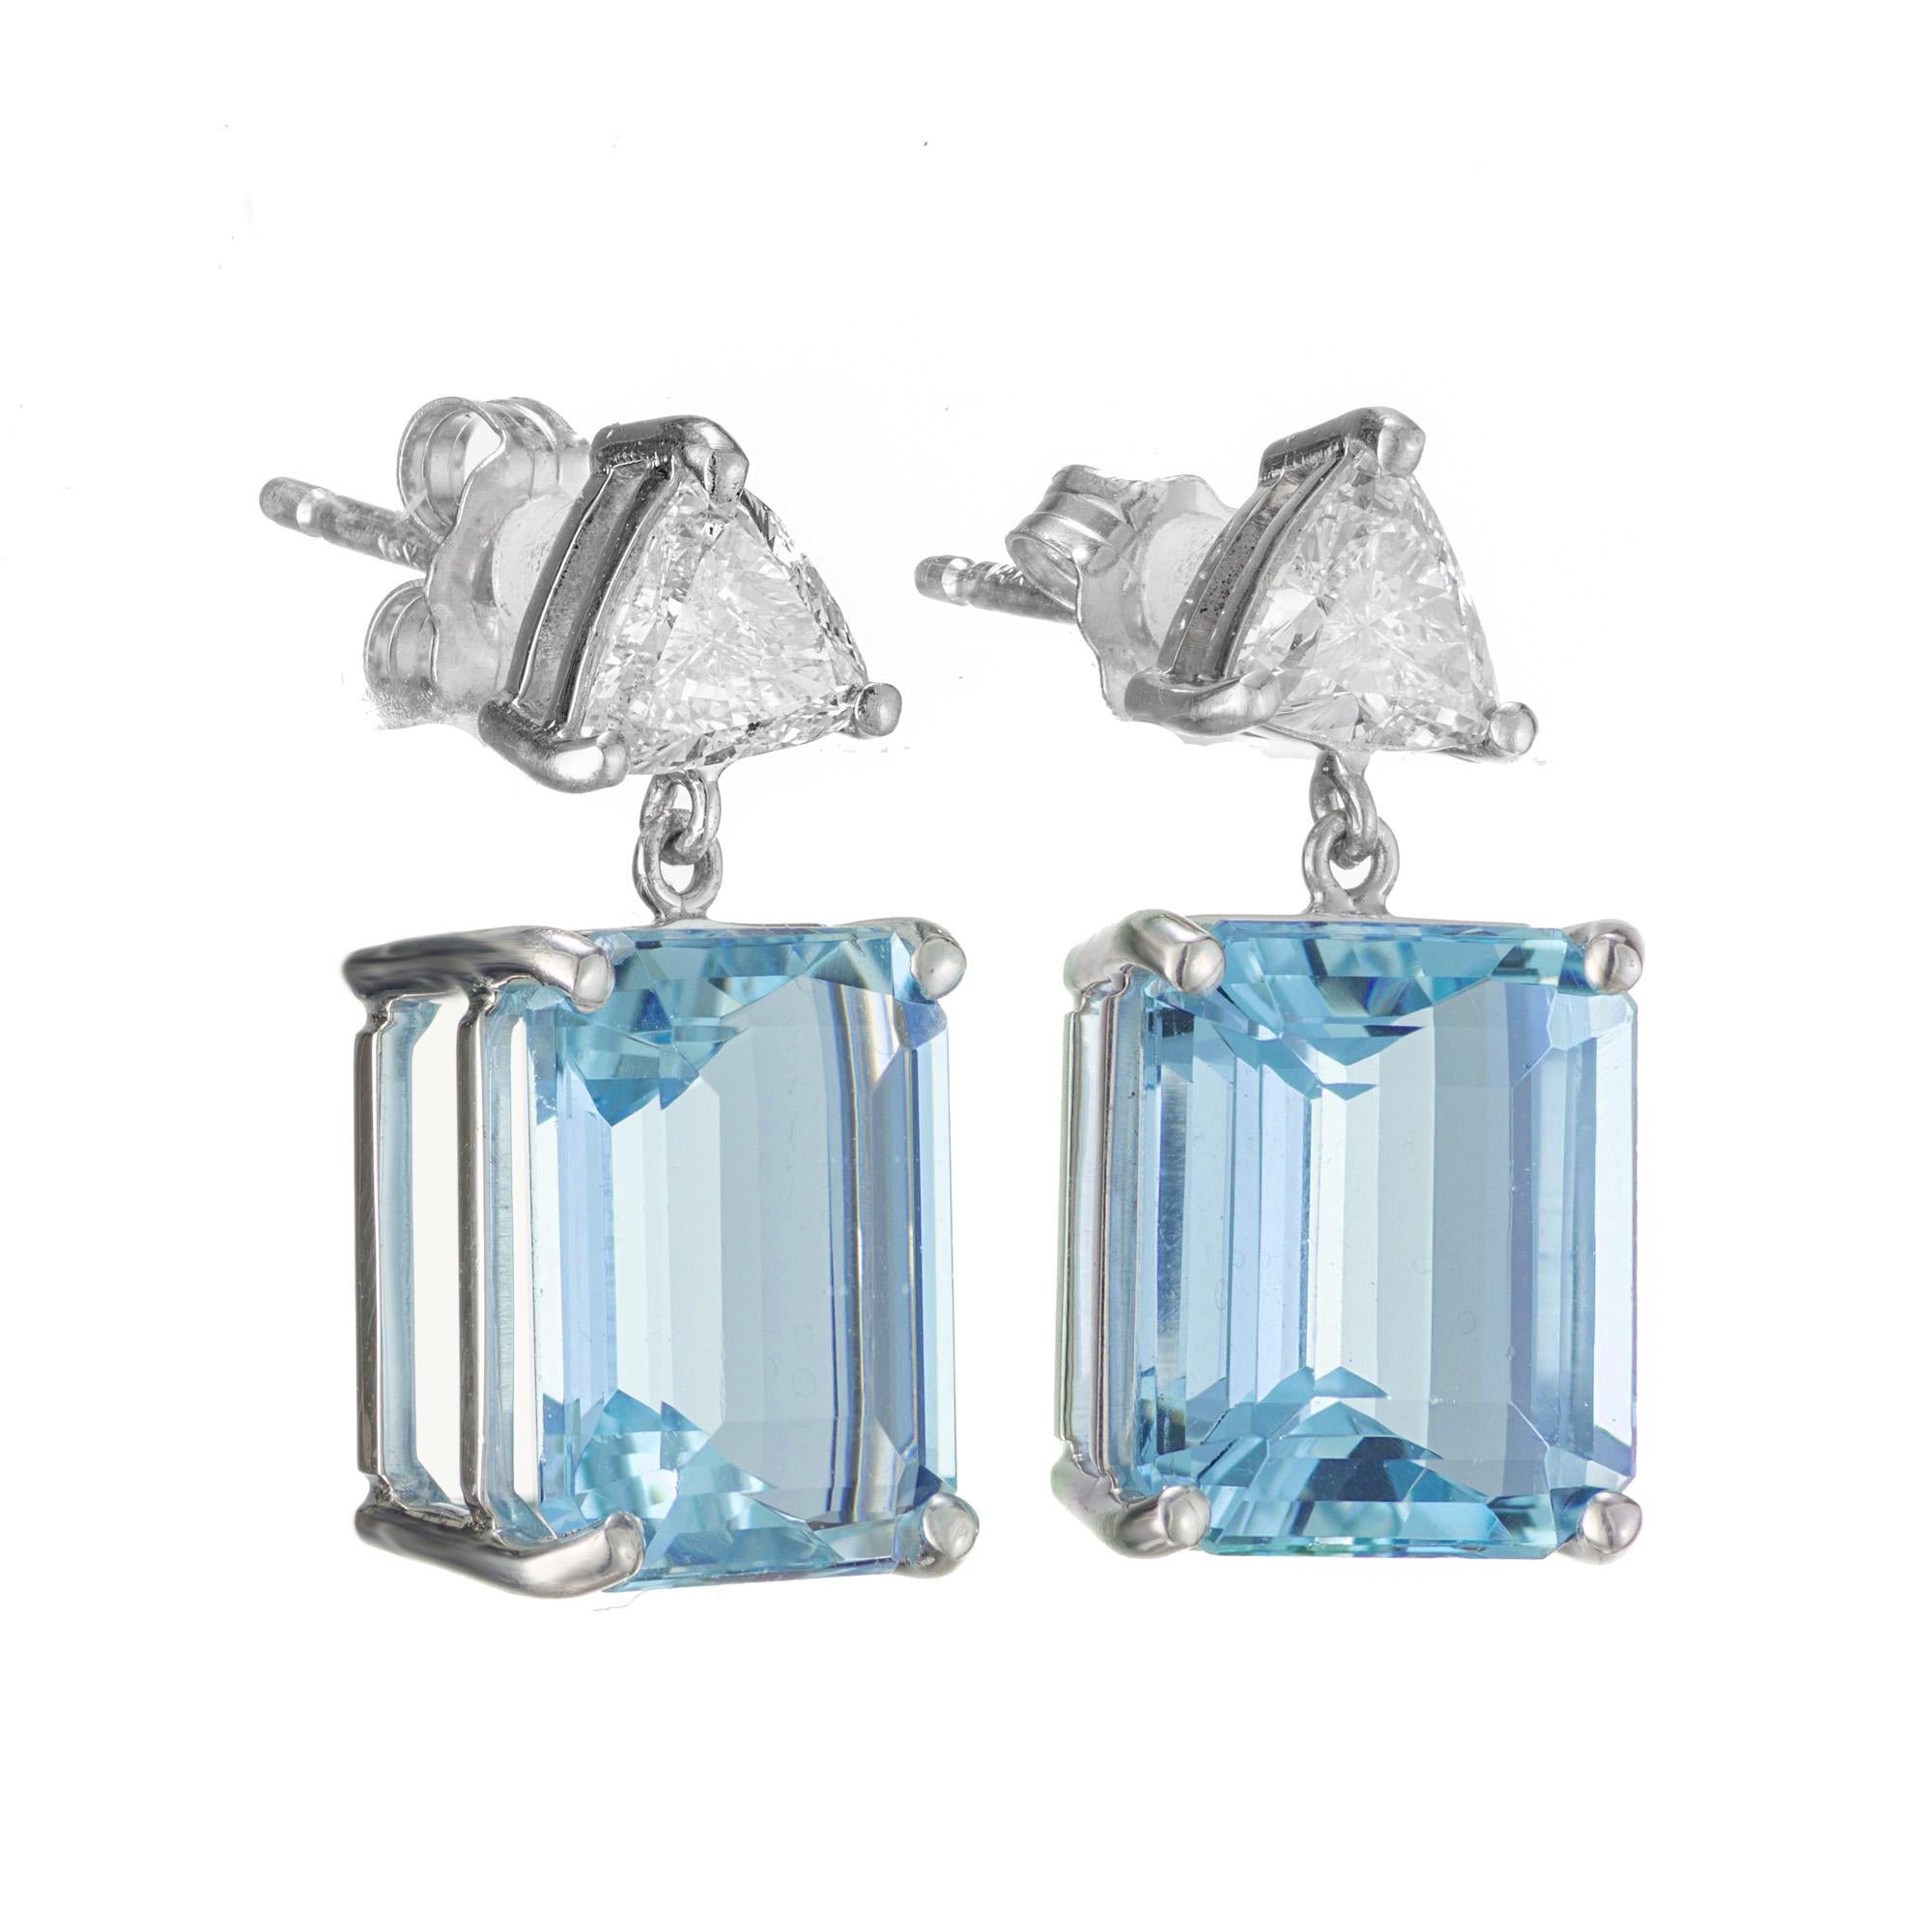 Aquamarine and diamond dangle earrings. 2 emerald cut vibrant blue aquamarines totaling 7.06cts set in 18k white gold four prong settings, complemented with 2 trilliant cut diamonds. These beautiful aquas are from a 1940's estate and with the